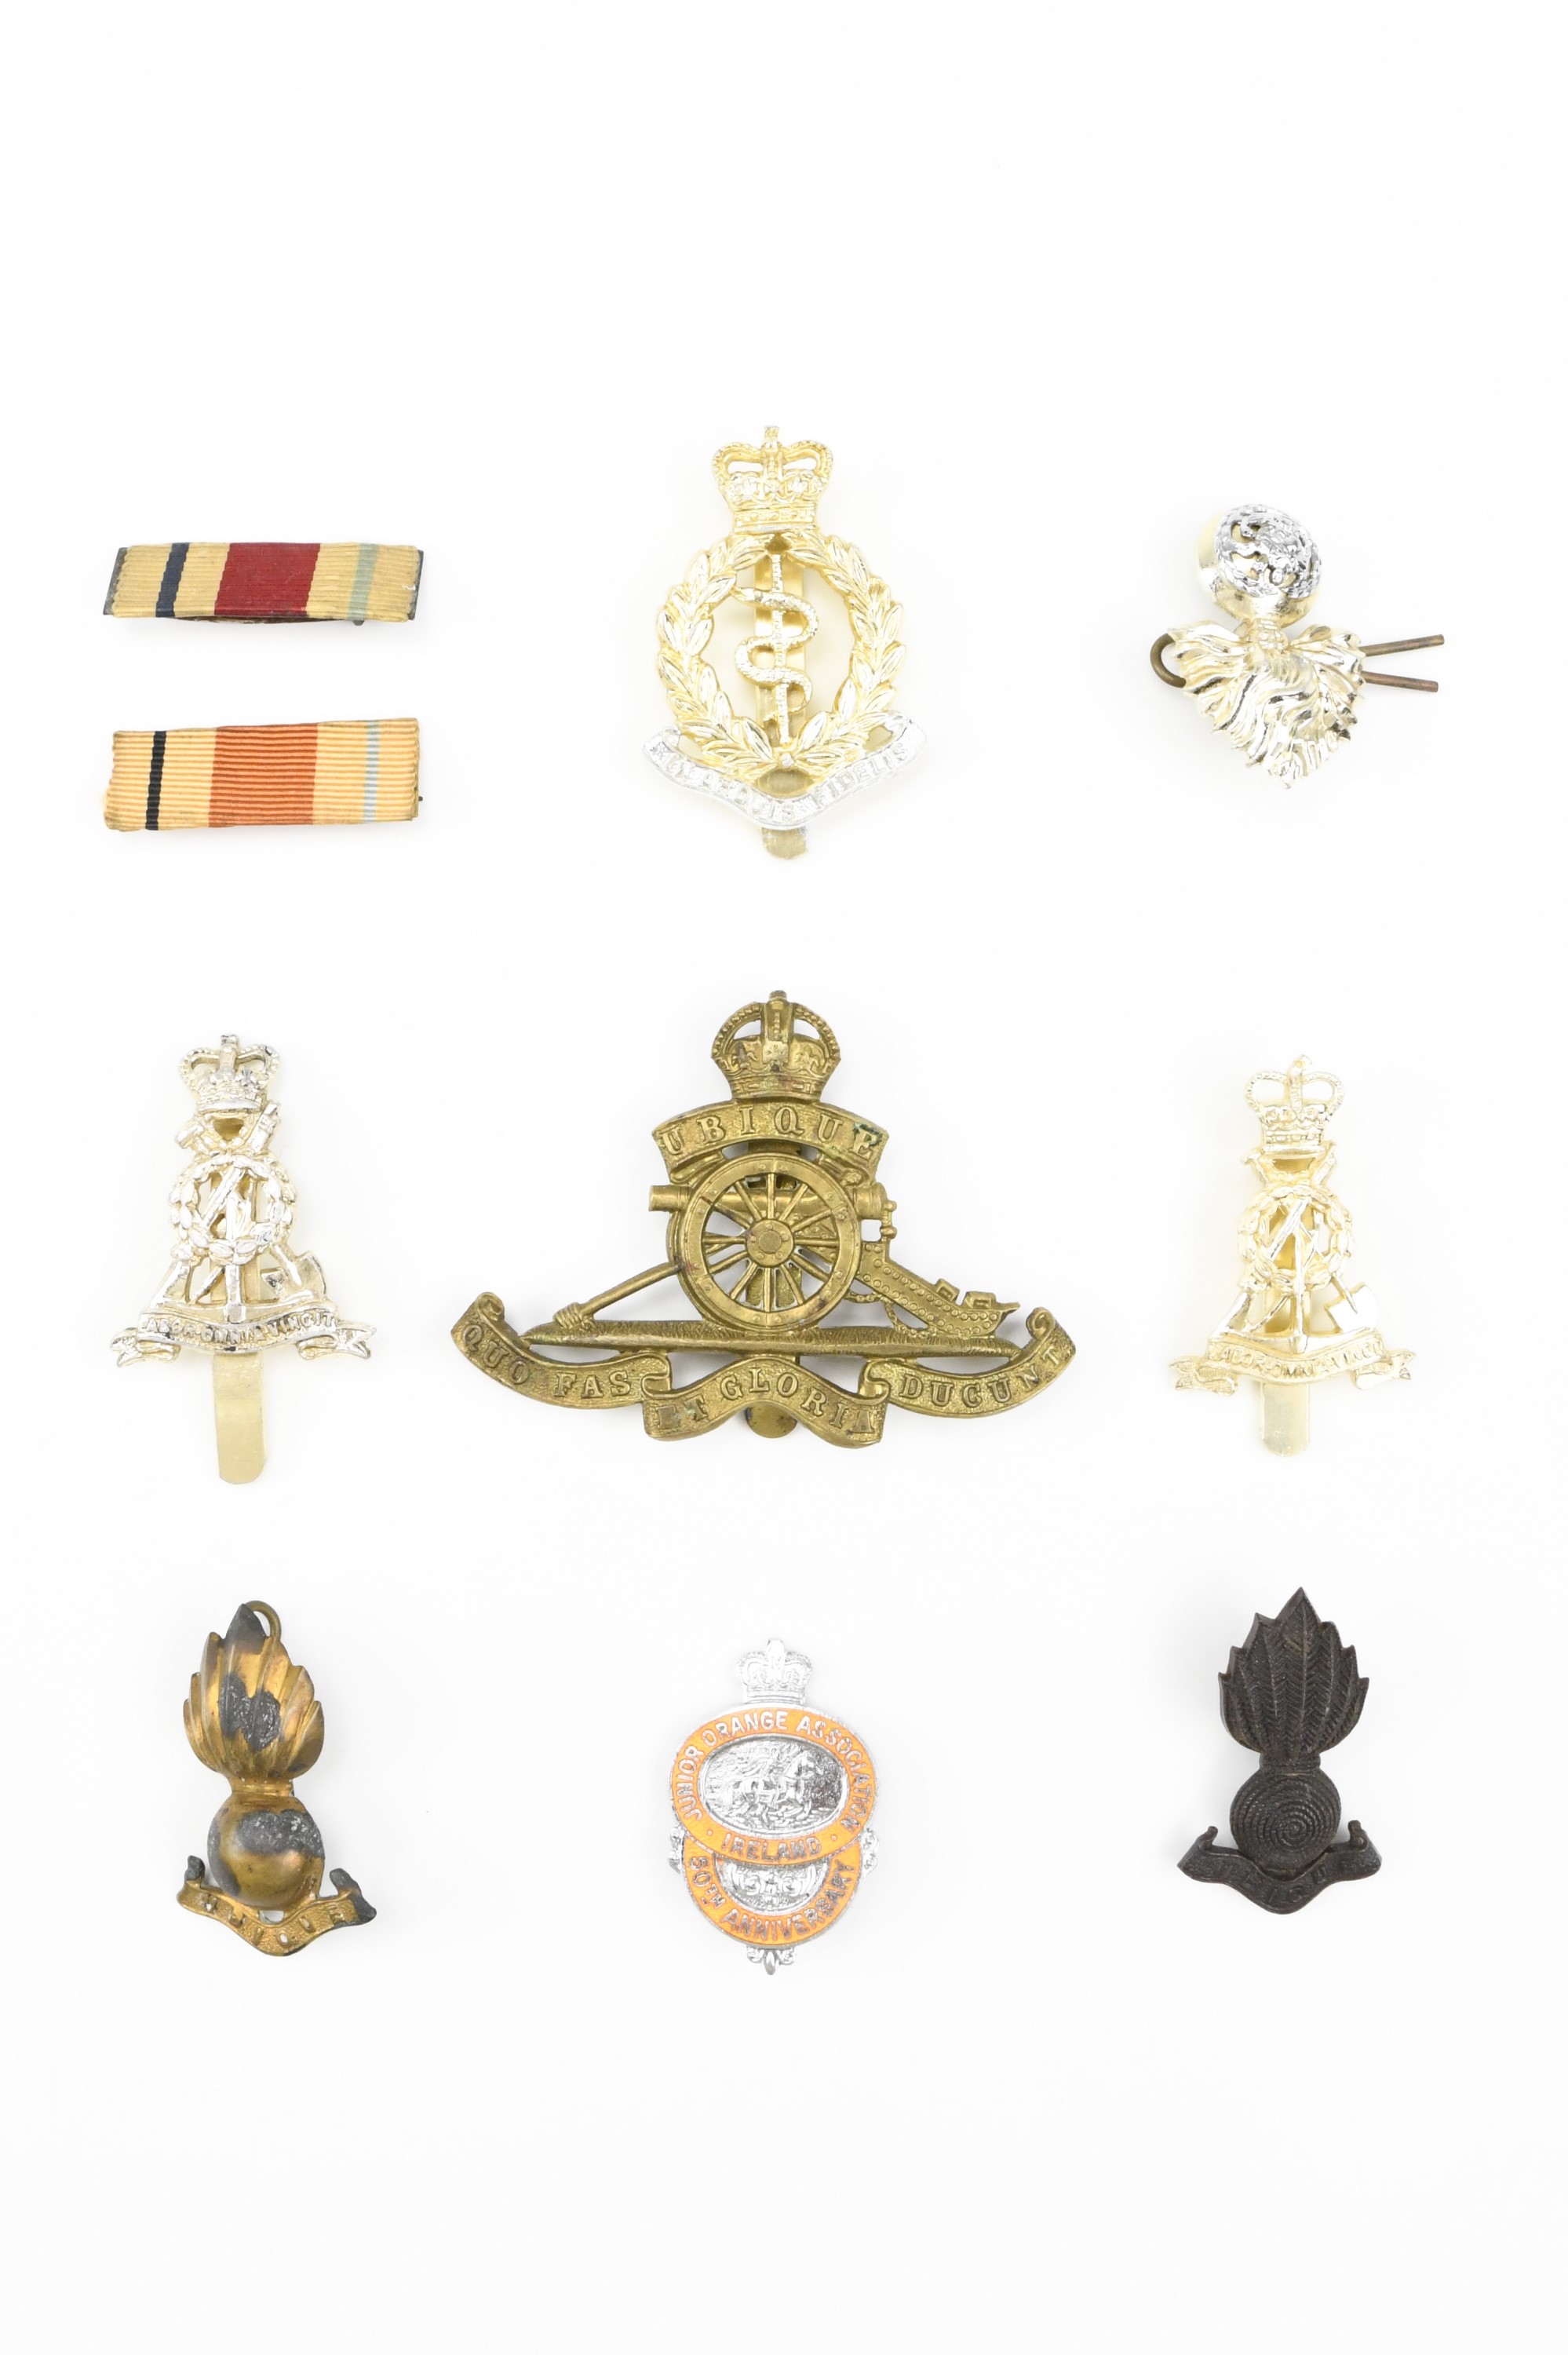 A small group of military insignia and medal ribbons including Staybrite cap badges